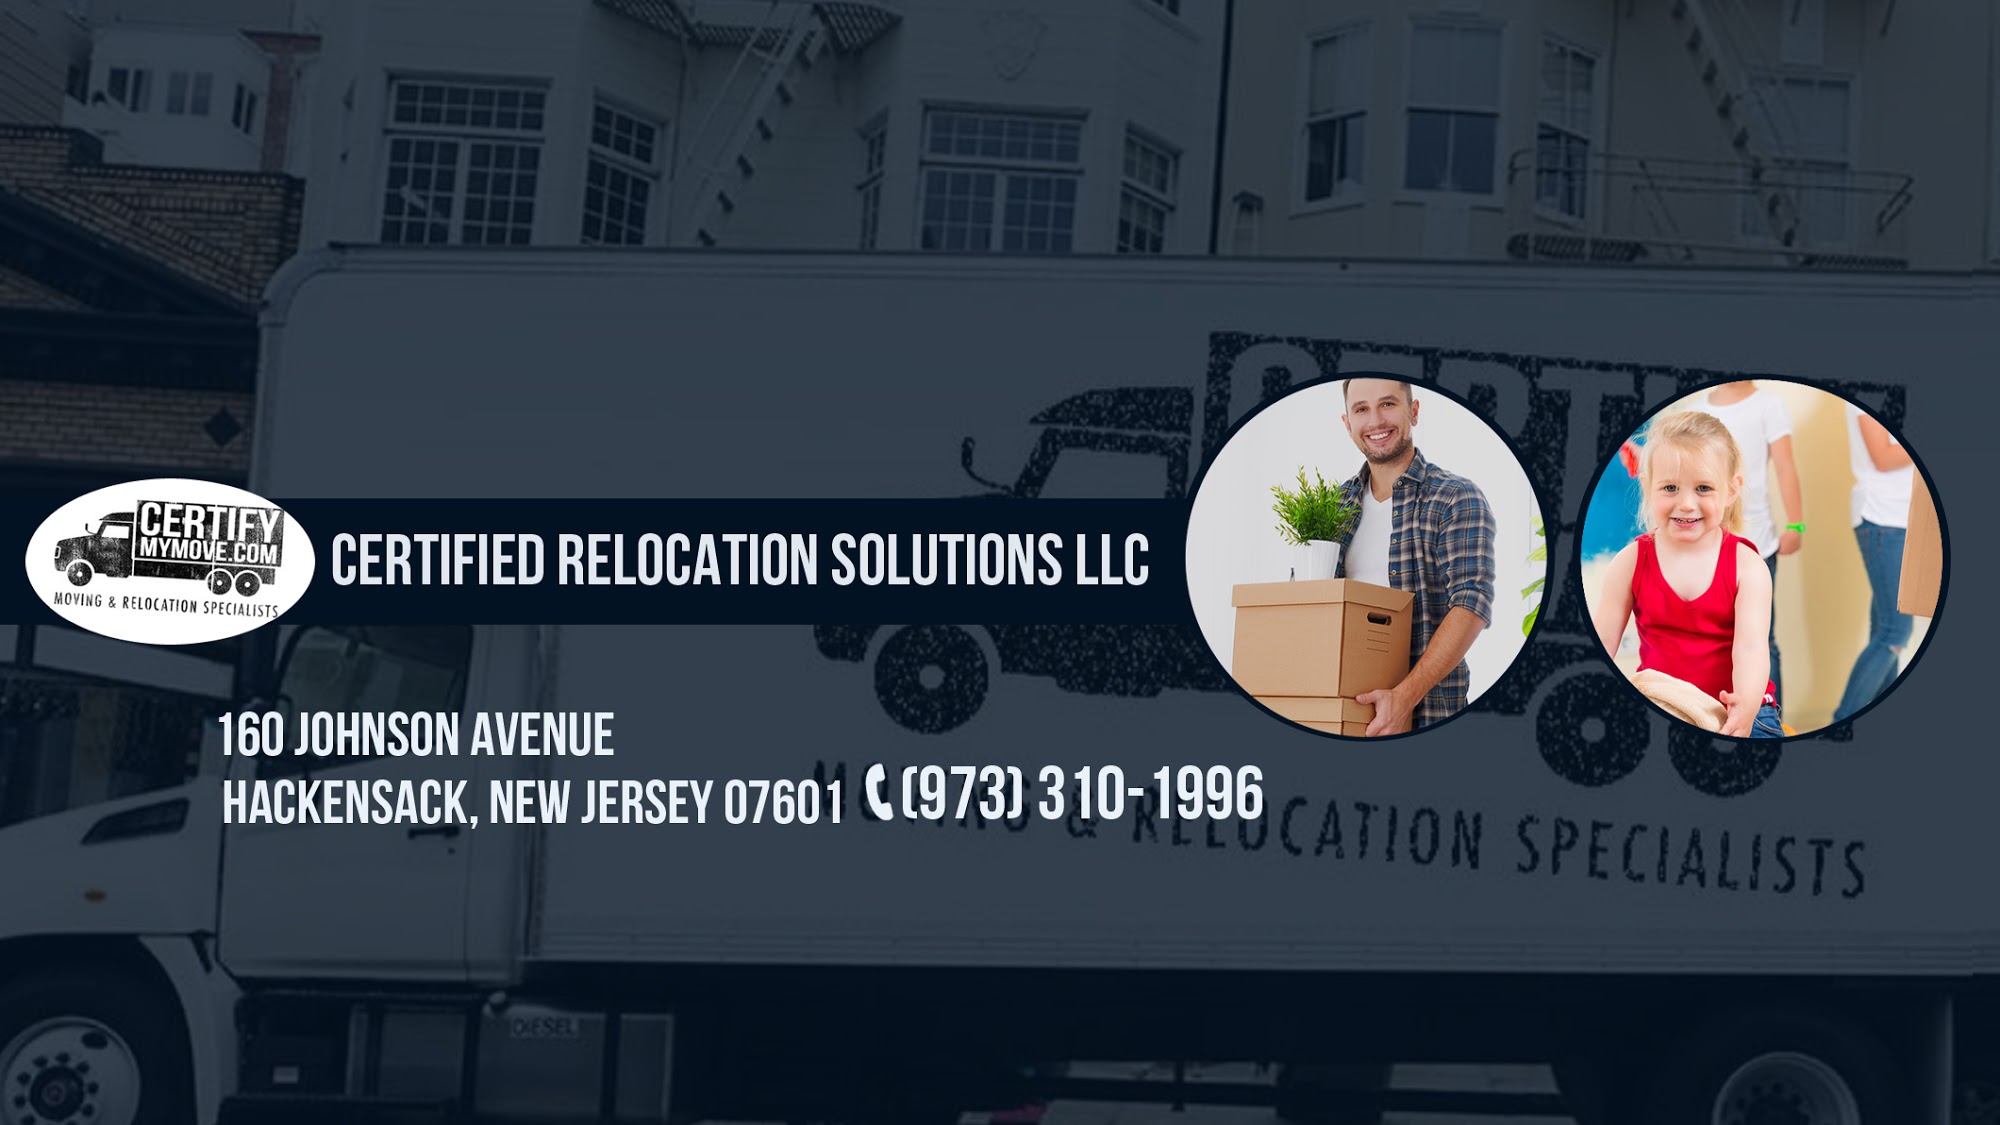 Certified Relocation Solutions LLC